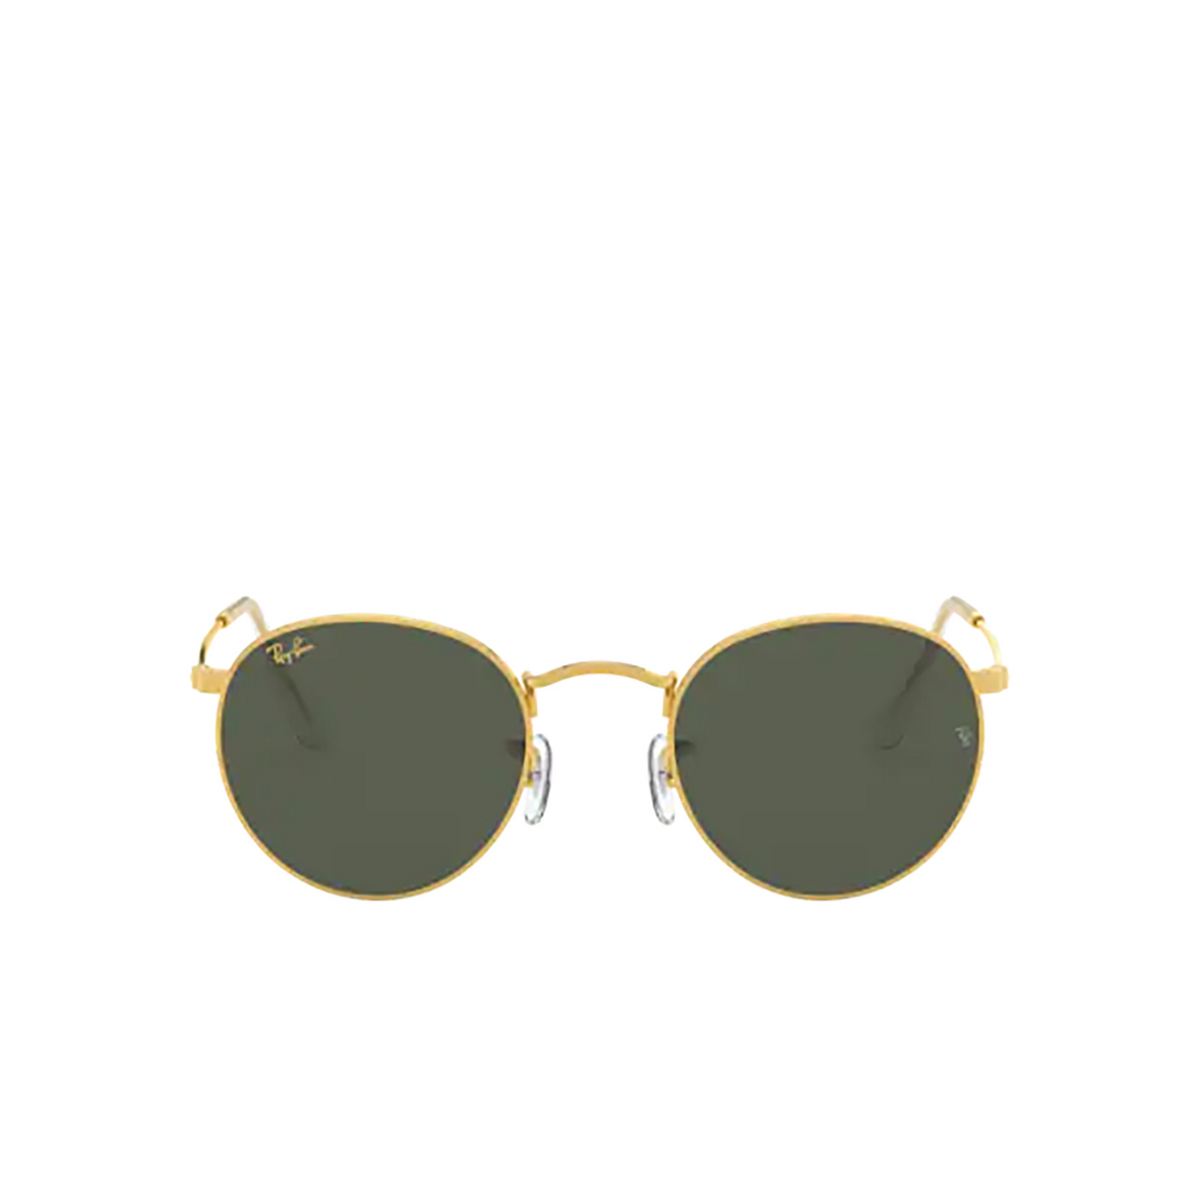 Ray-Ban ROUND METAL Sunglasses 919631 LEGEND GOLD - front view